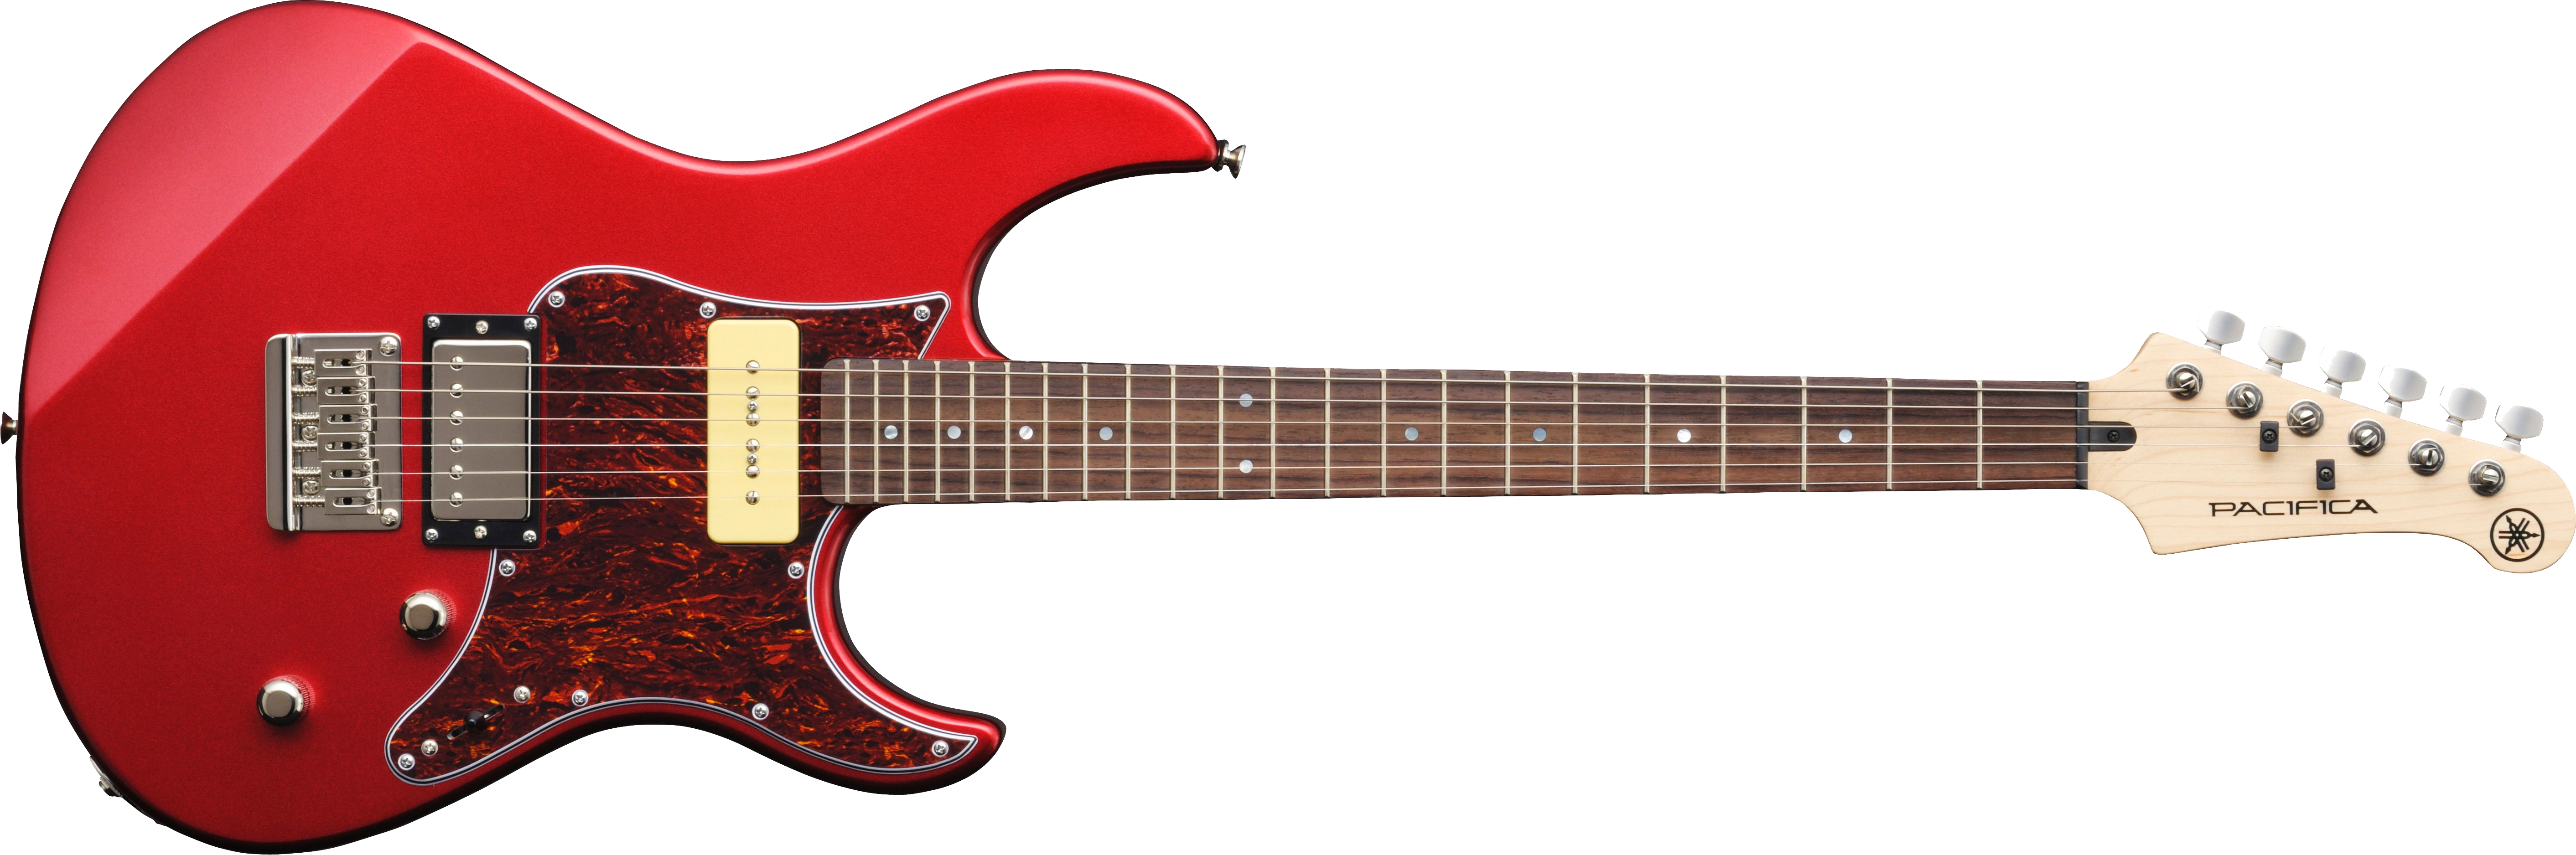 Music Red Guitar PNG Clipart